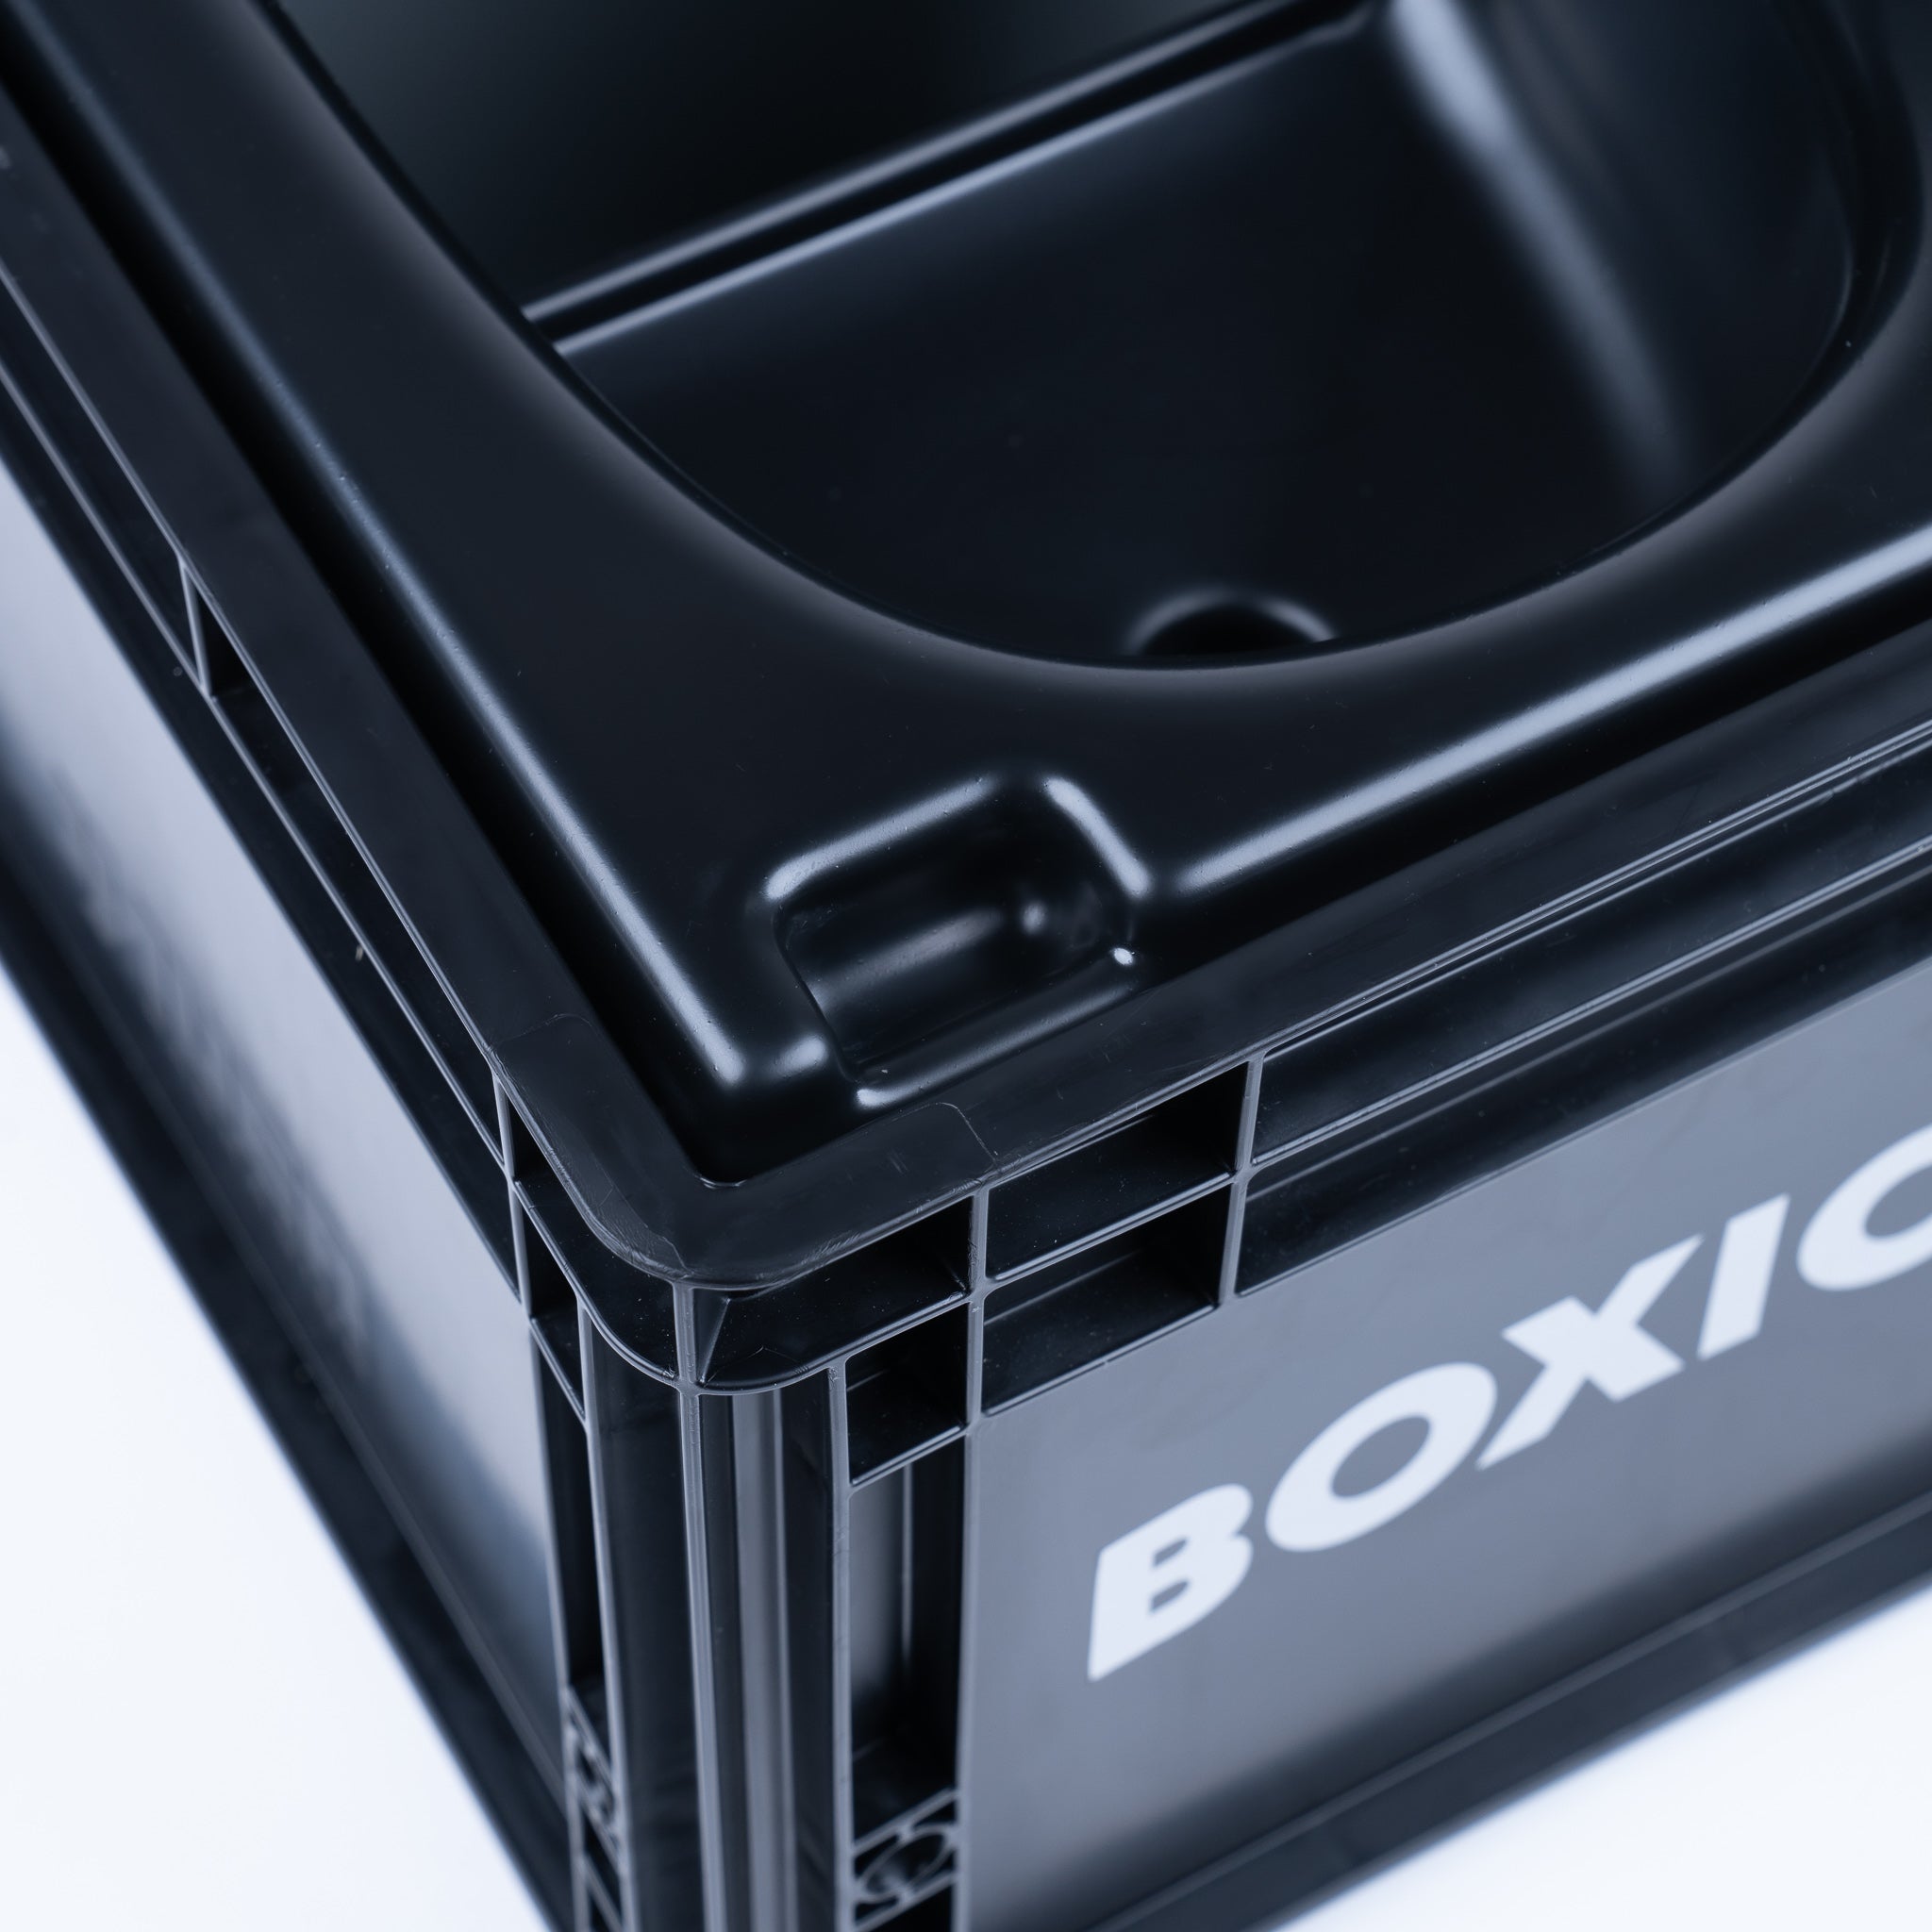 BOXIO Portable Toilet - Convenient Camping Toilet! Compact, Safe, and  Personal Composting Toilet with Convenient Disposal for Camping, RVing,  Boating, Road Trips and Other Recreational Activities